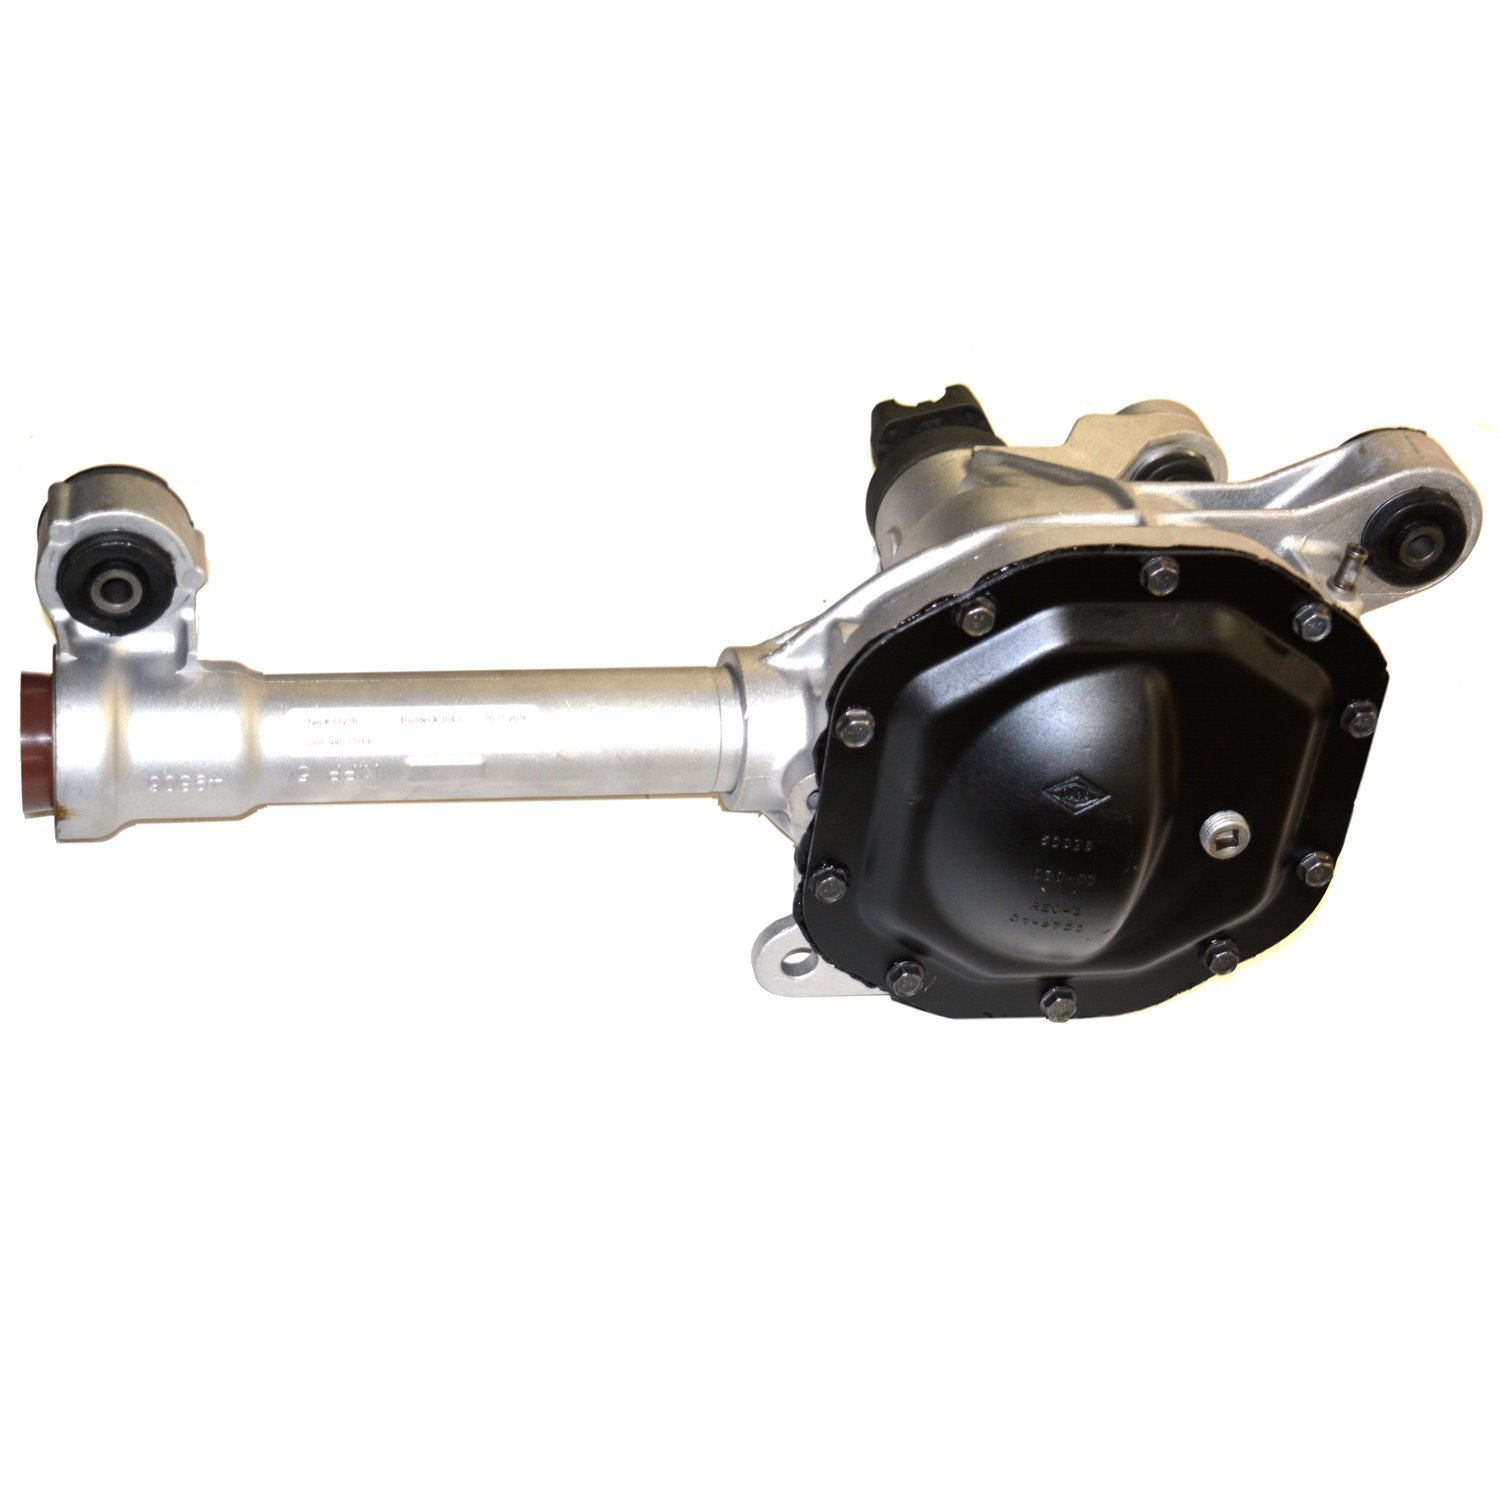 Remanufactured Axle Assembly for Dana 30 02-05 Ford Explorer 3.55 Ratio